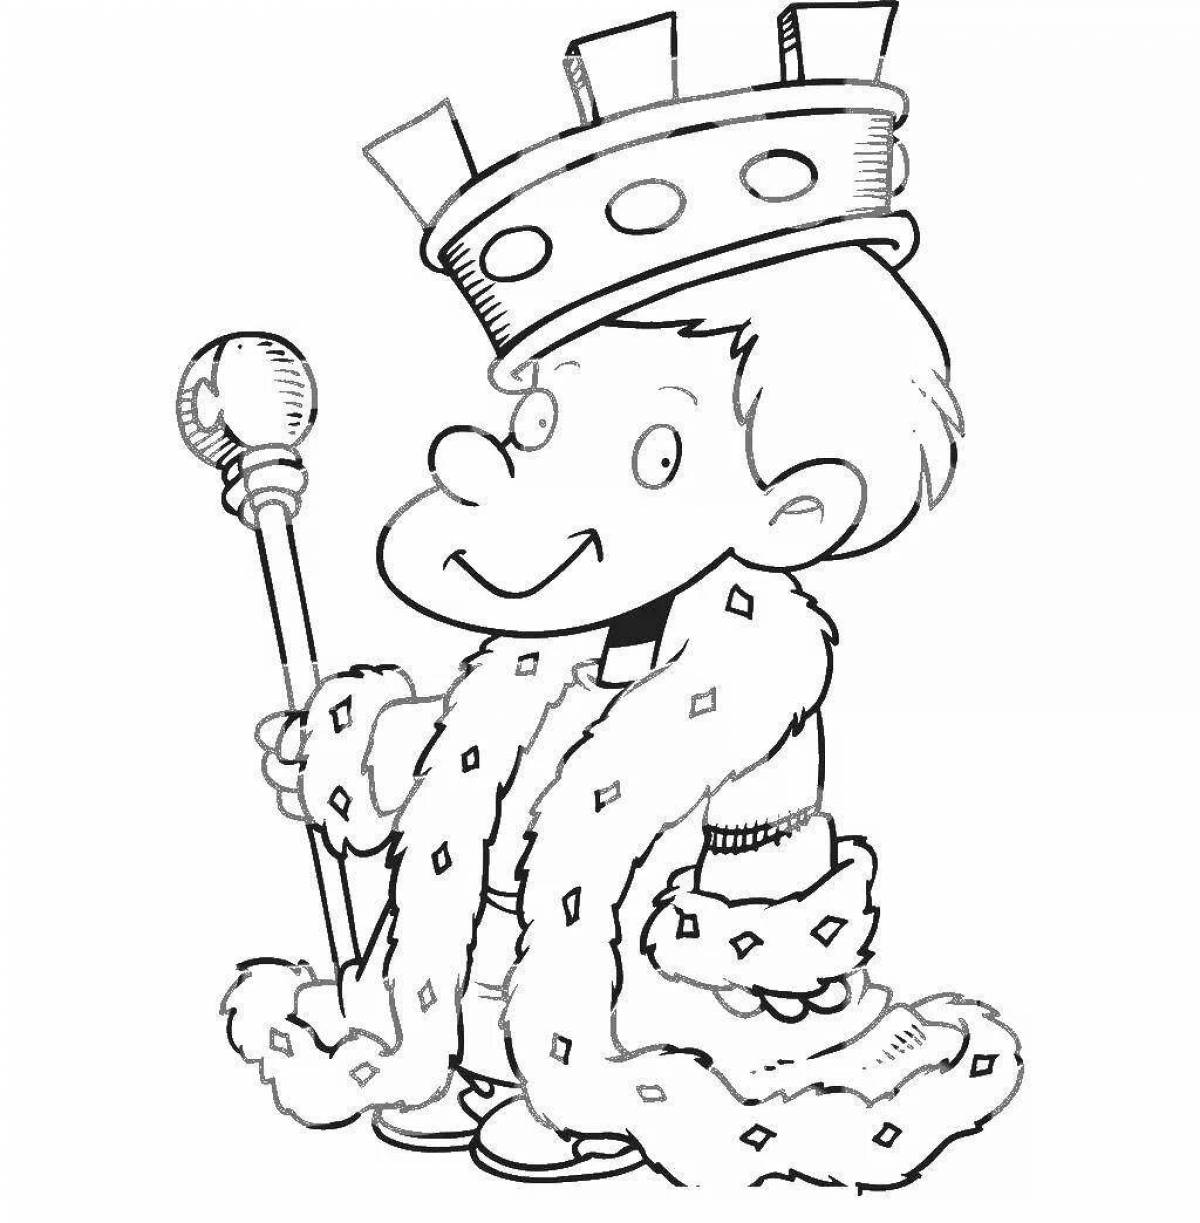 Exquisite king coloring pages for kids